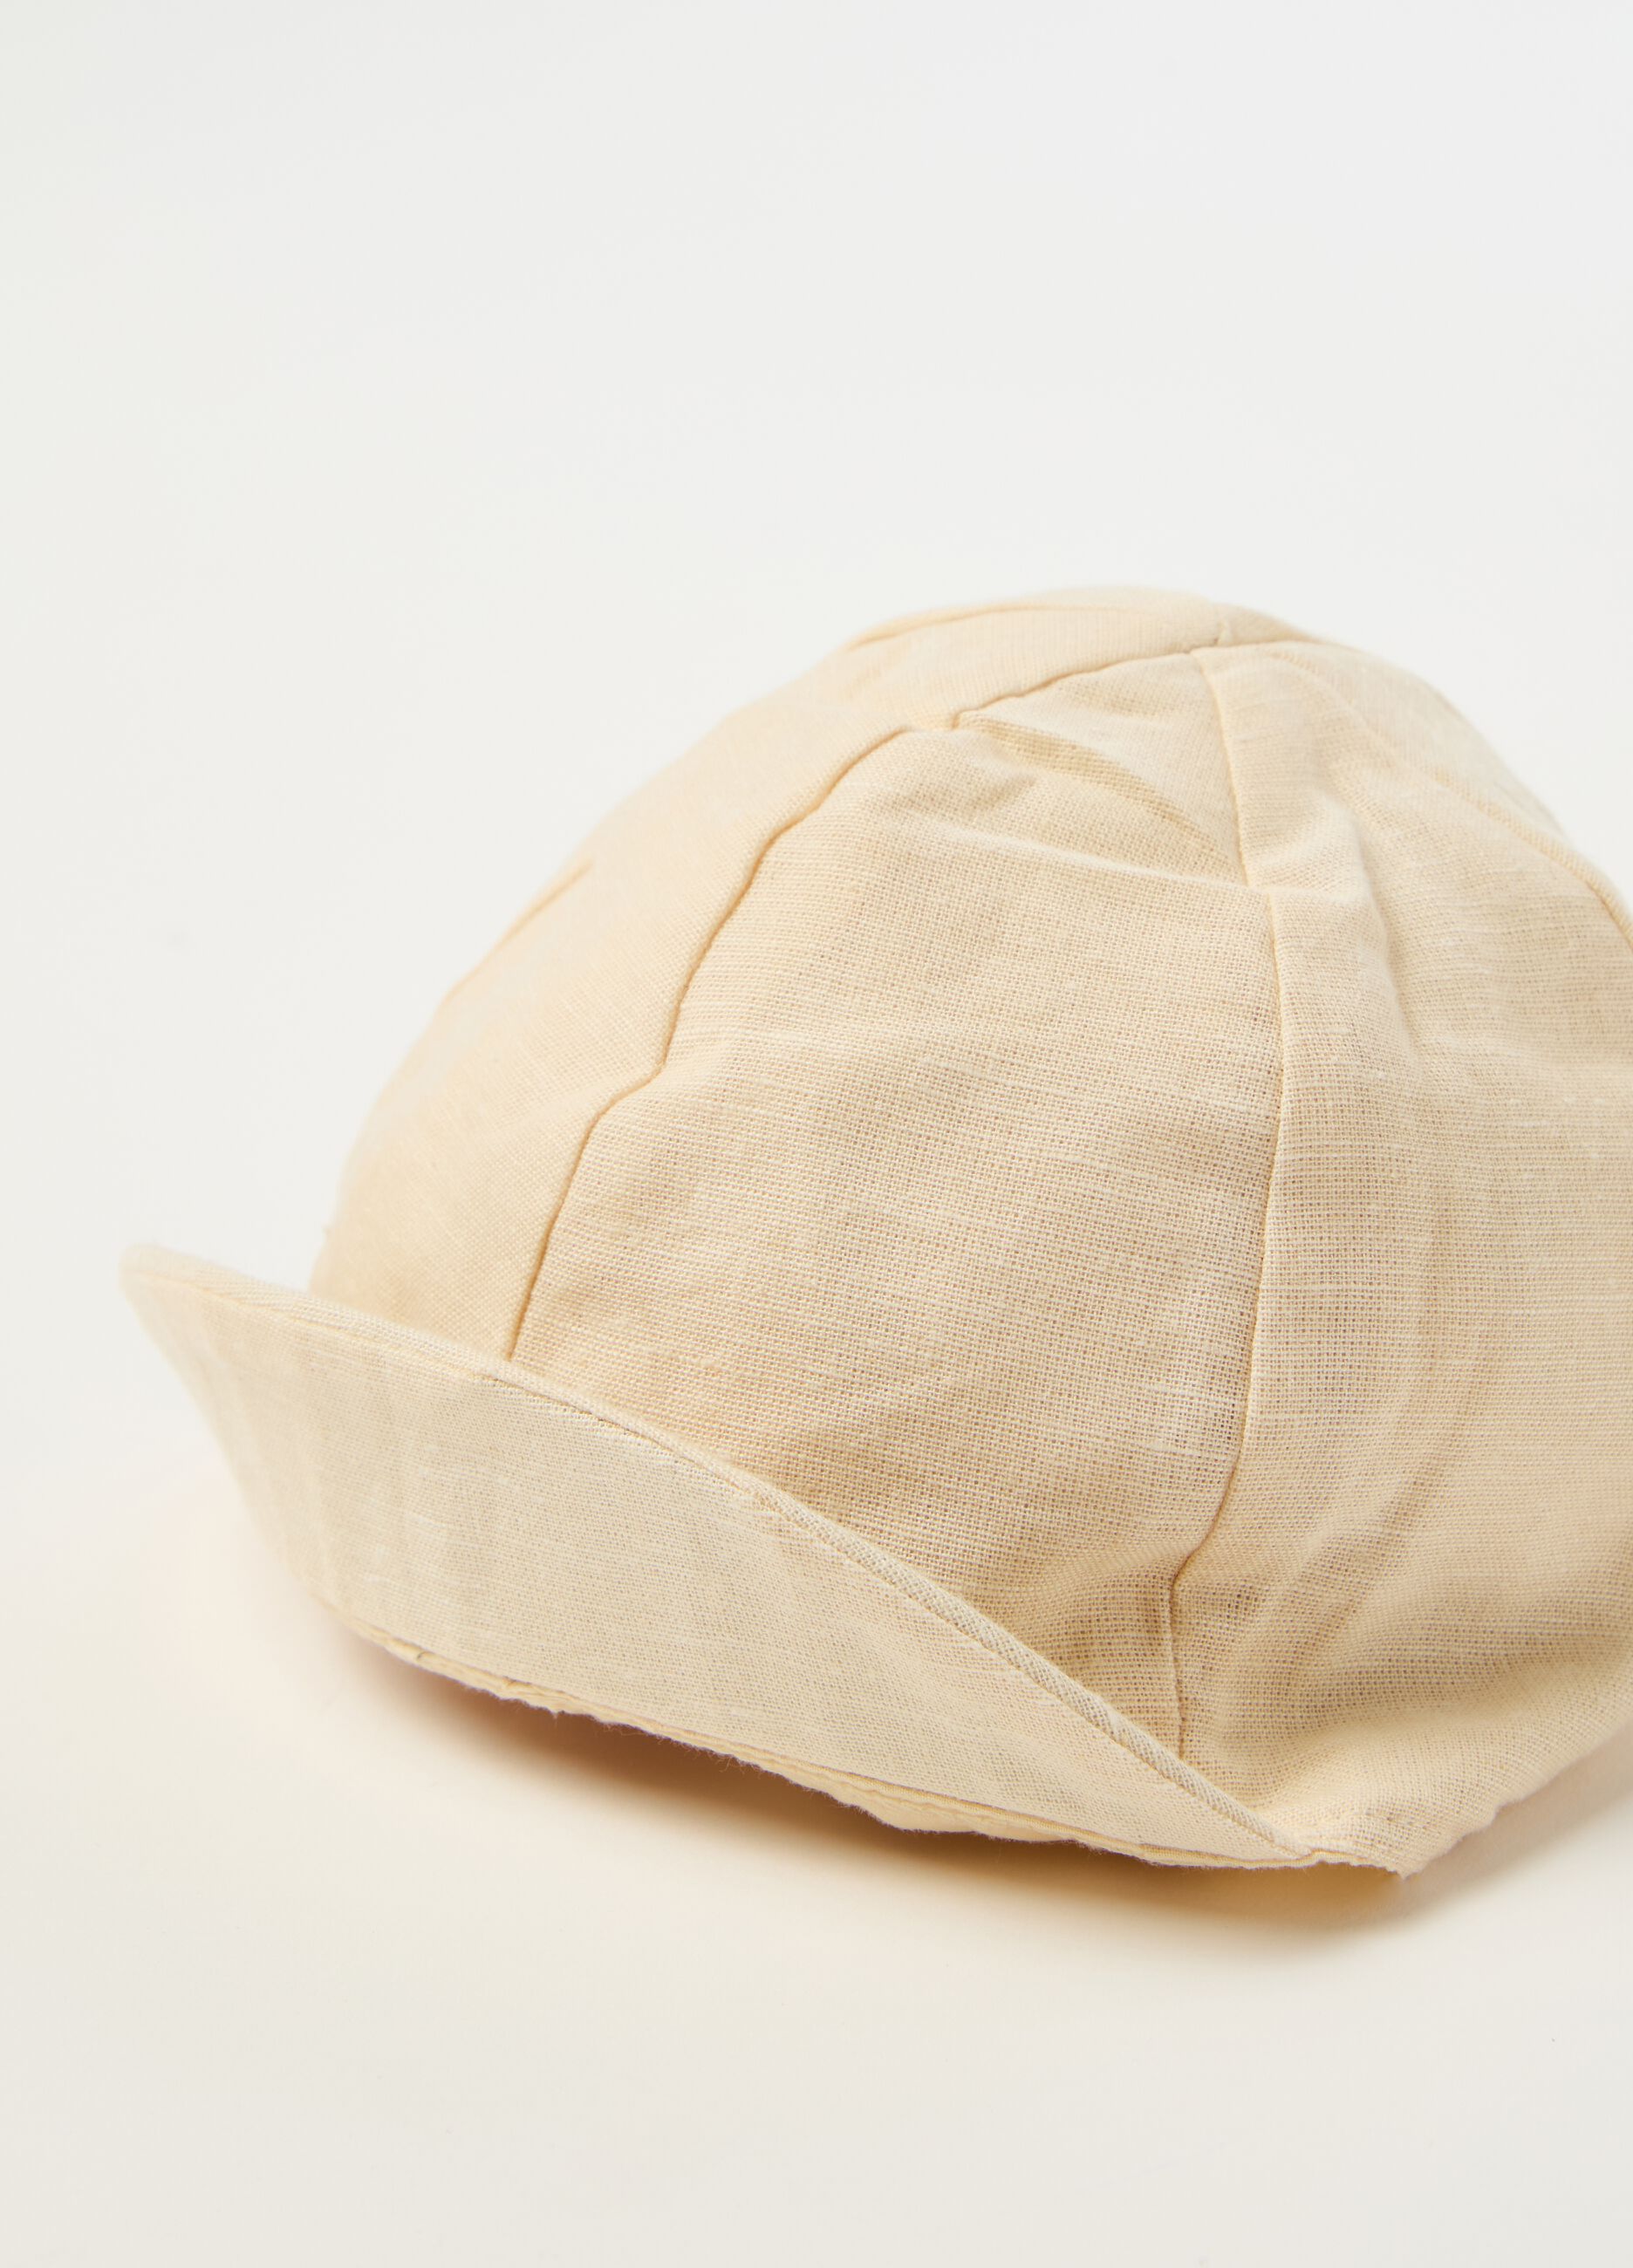 Aviator hat in cotton and linen